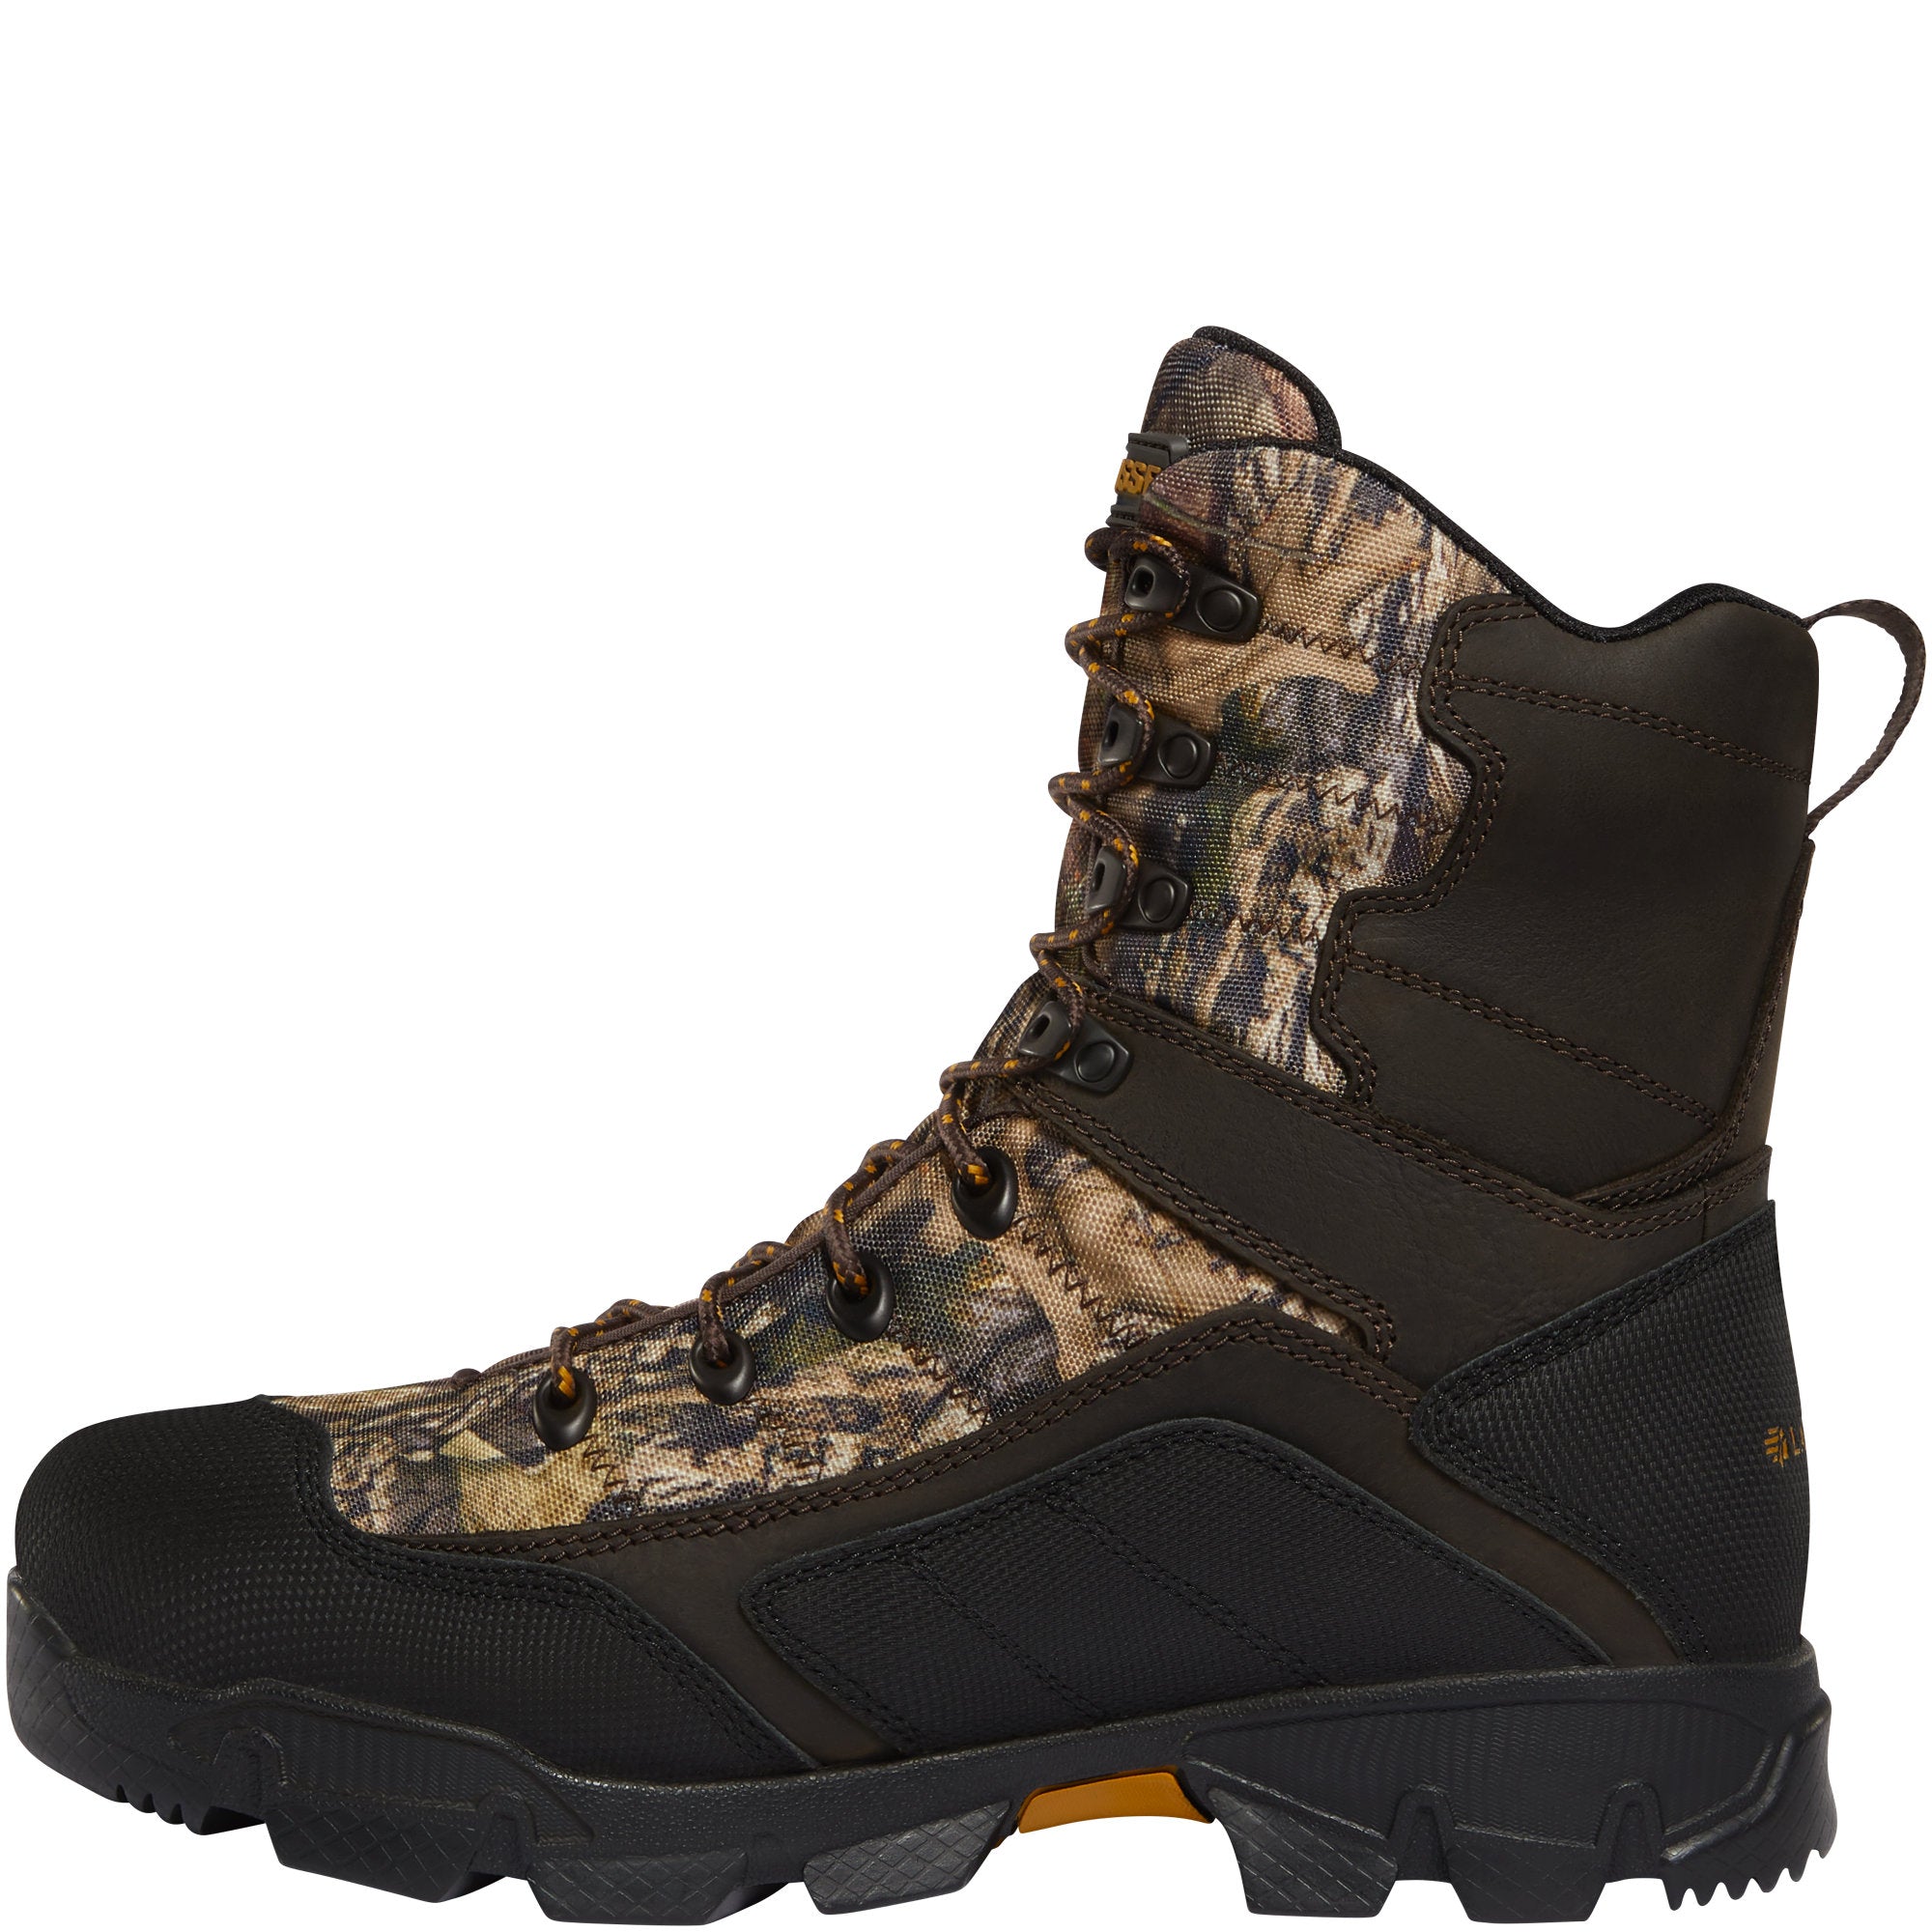 LaCrosse Cold Snap 9" Waterproof / Insulated - Wide - Mens